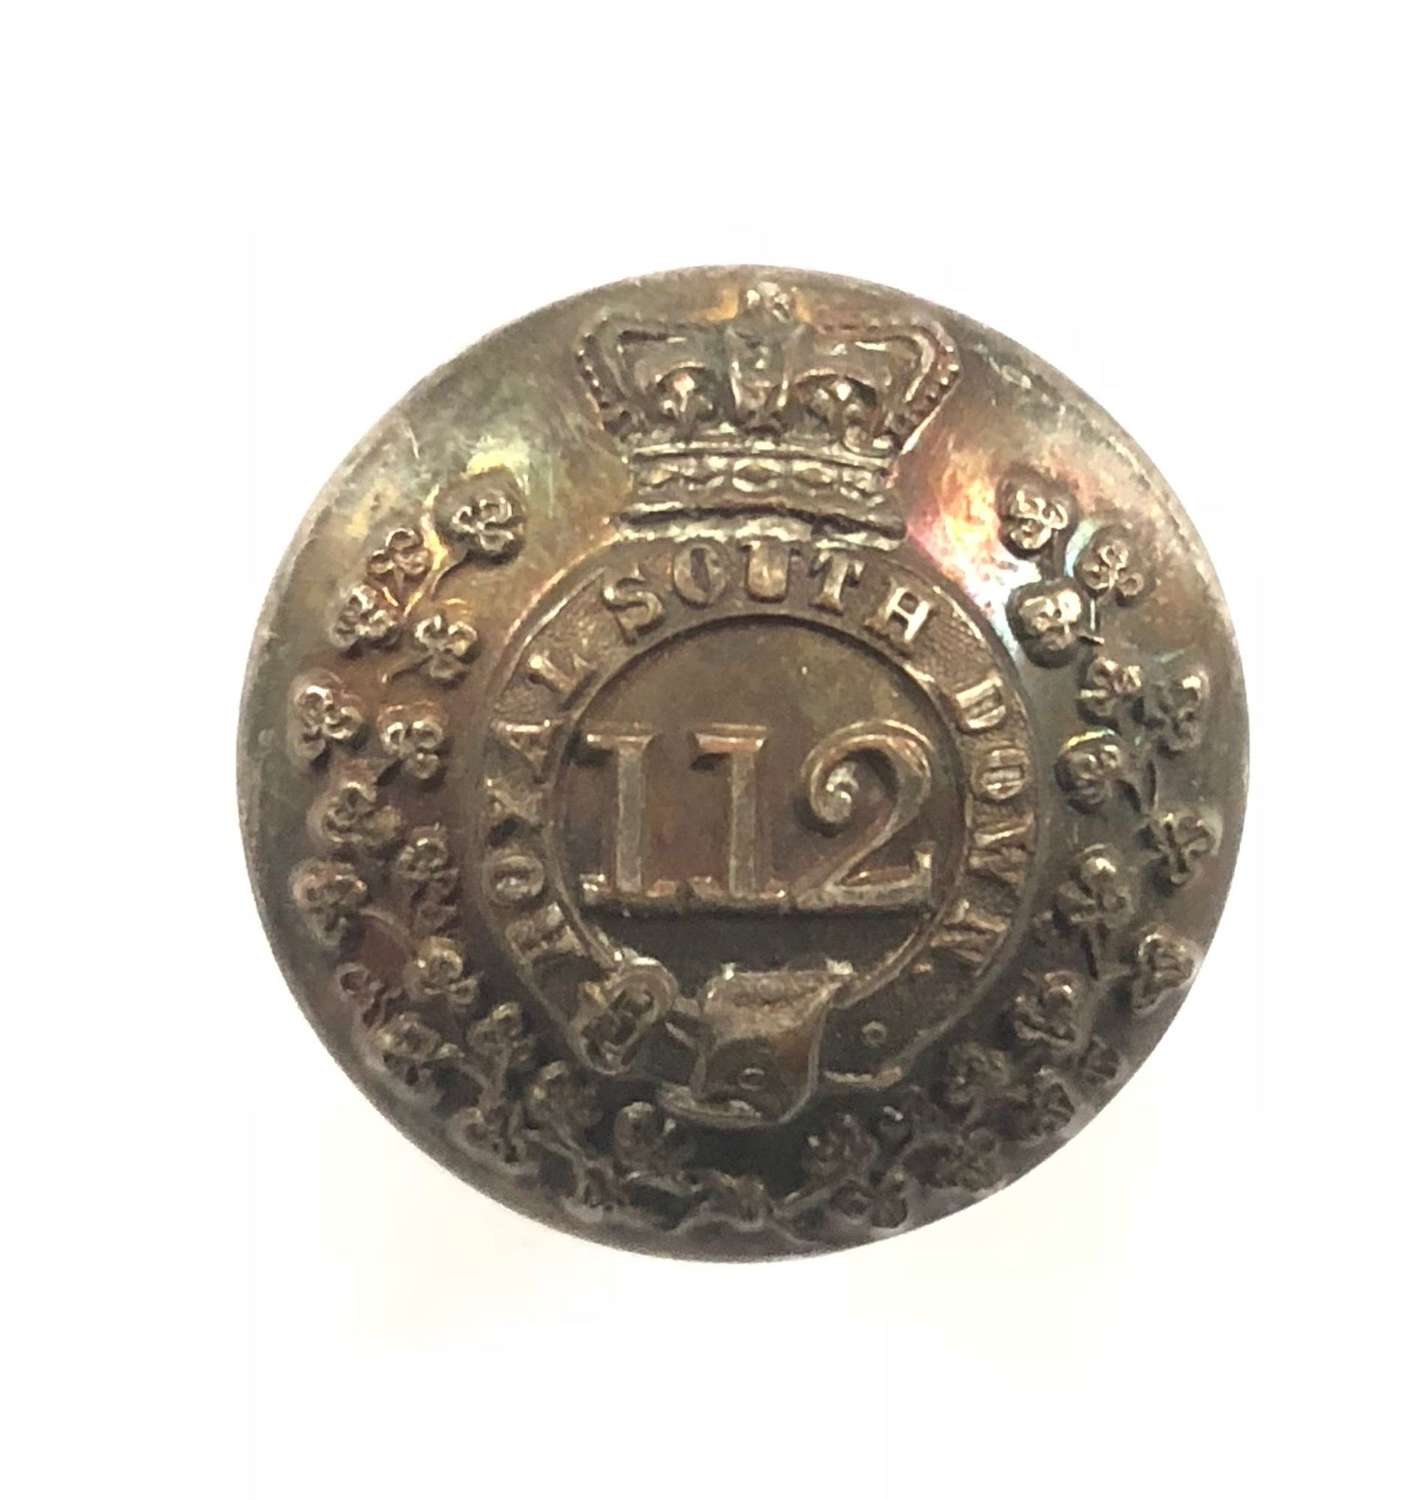 Irish. Royal South Down Militia Victorian Officer’s coatee button